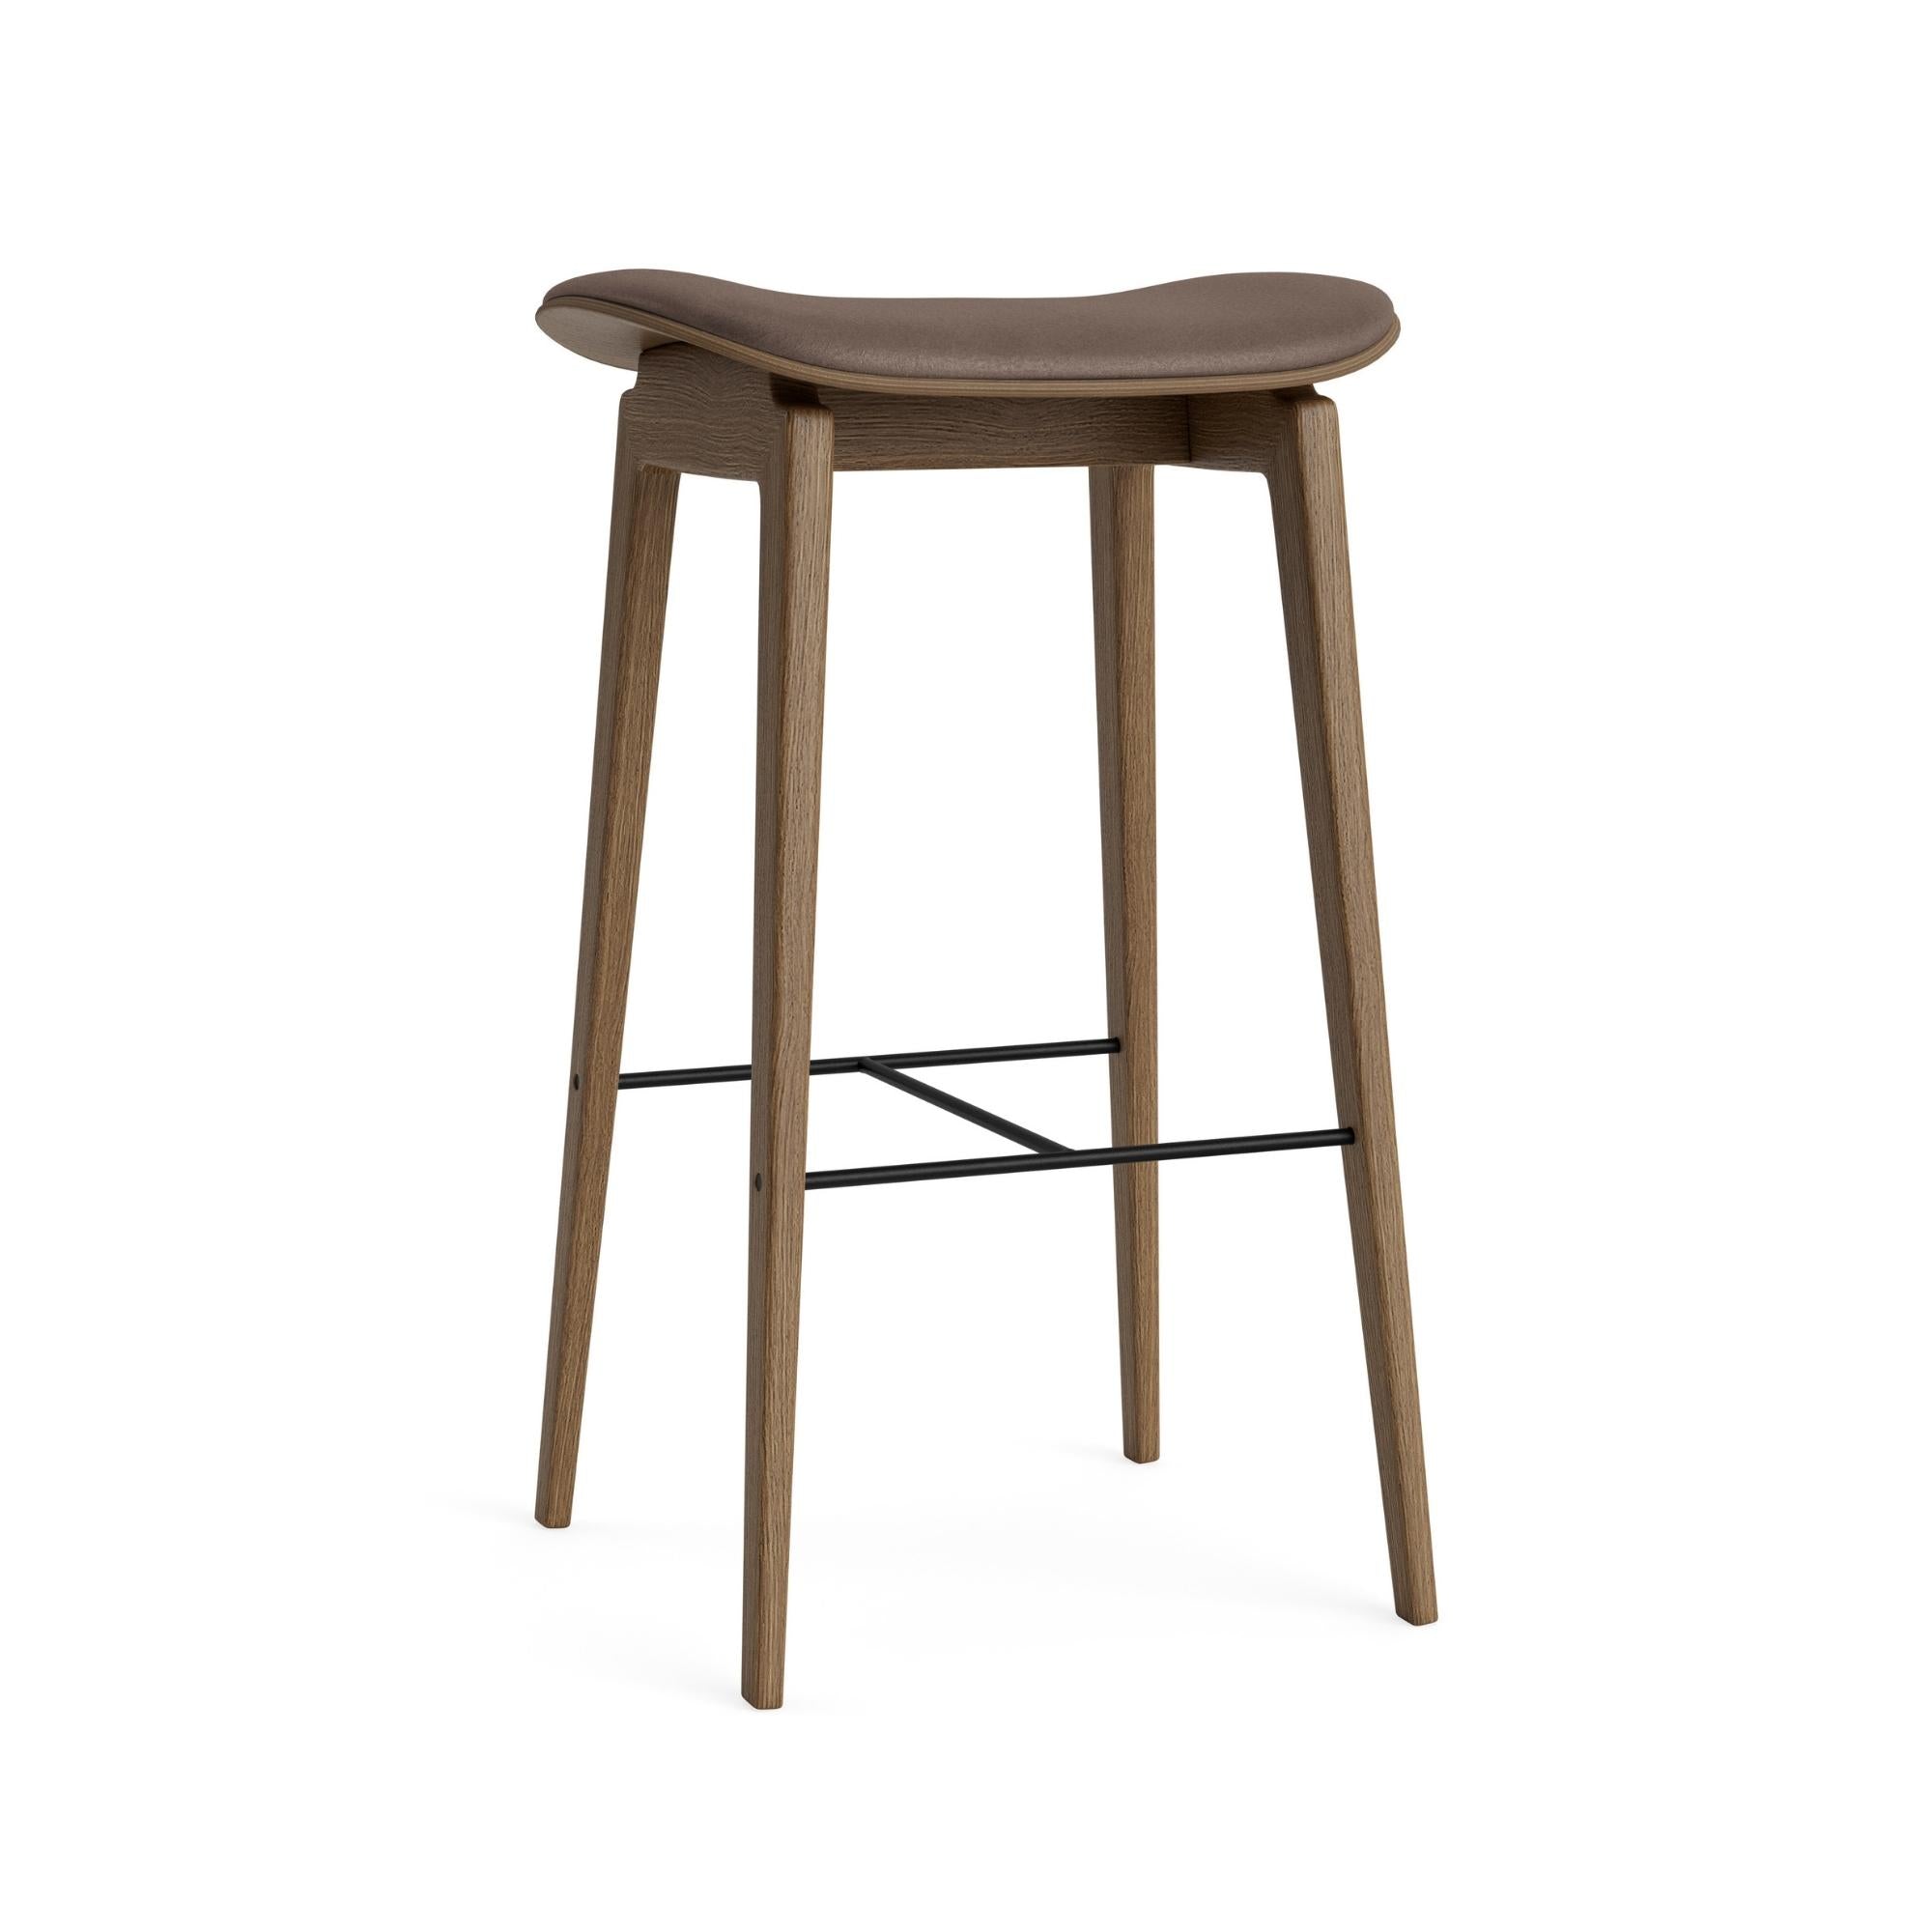 NY11 Bar stool - Leather - THAT COOL LIVING